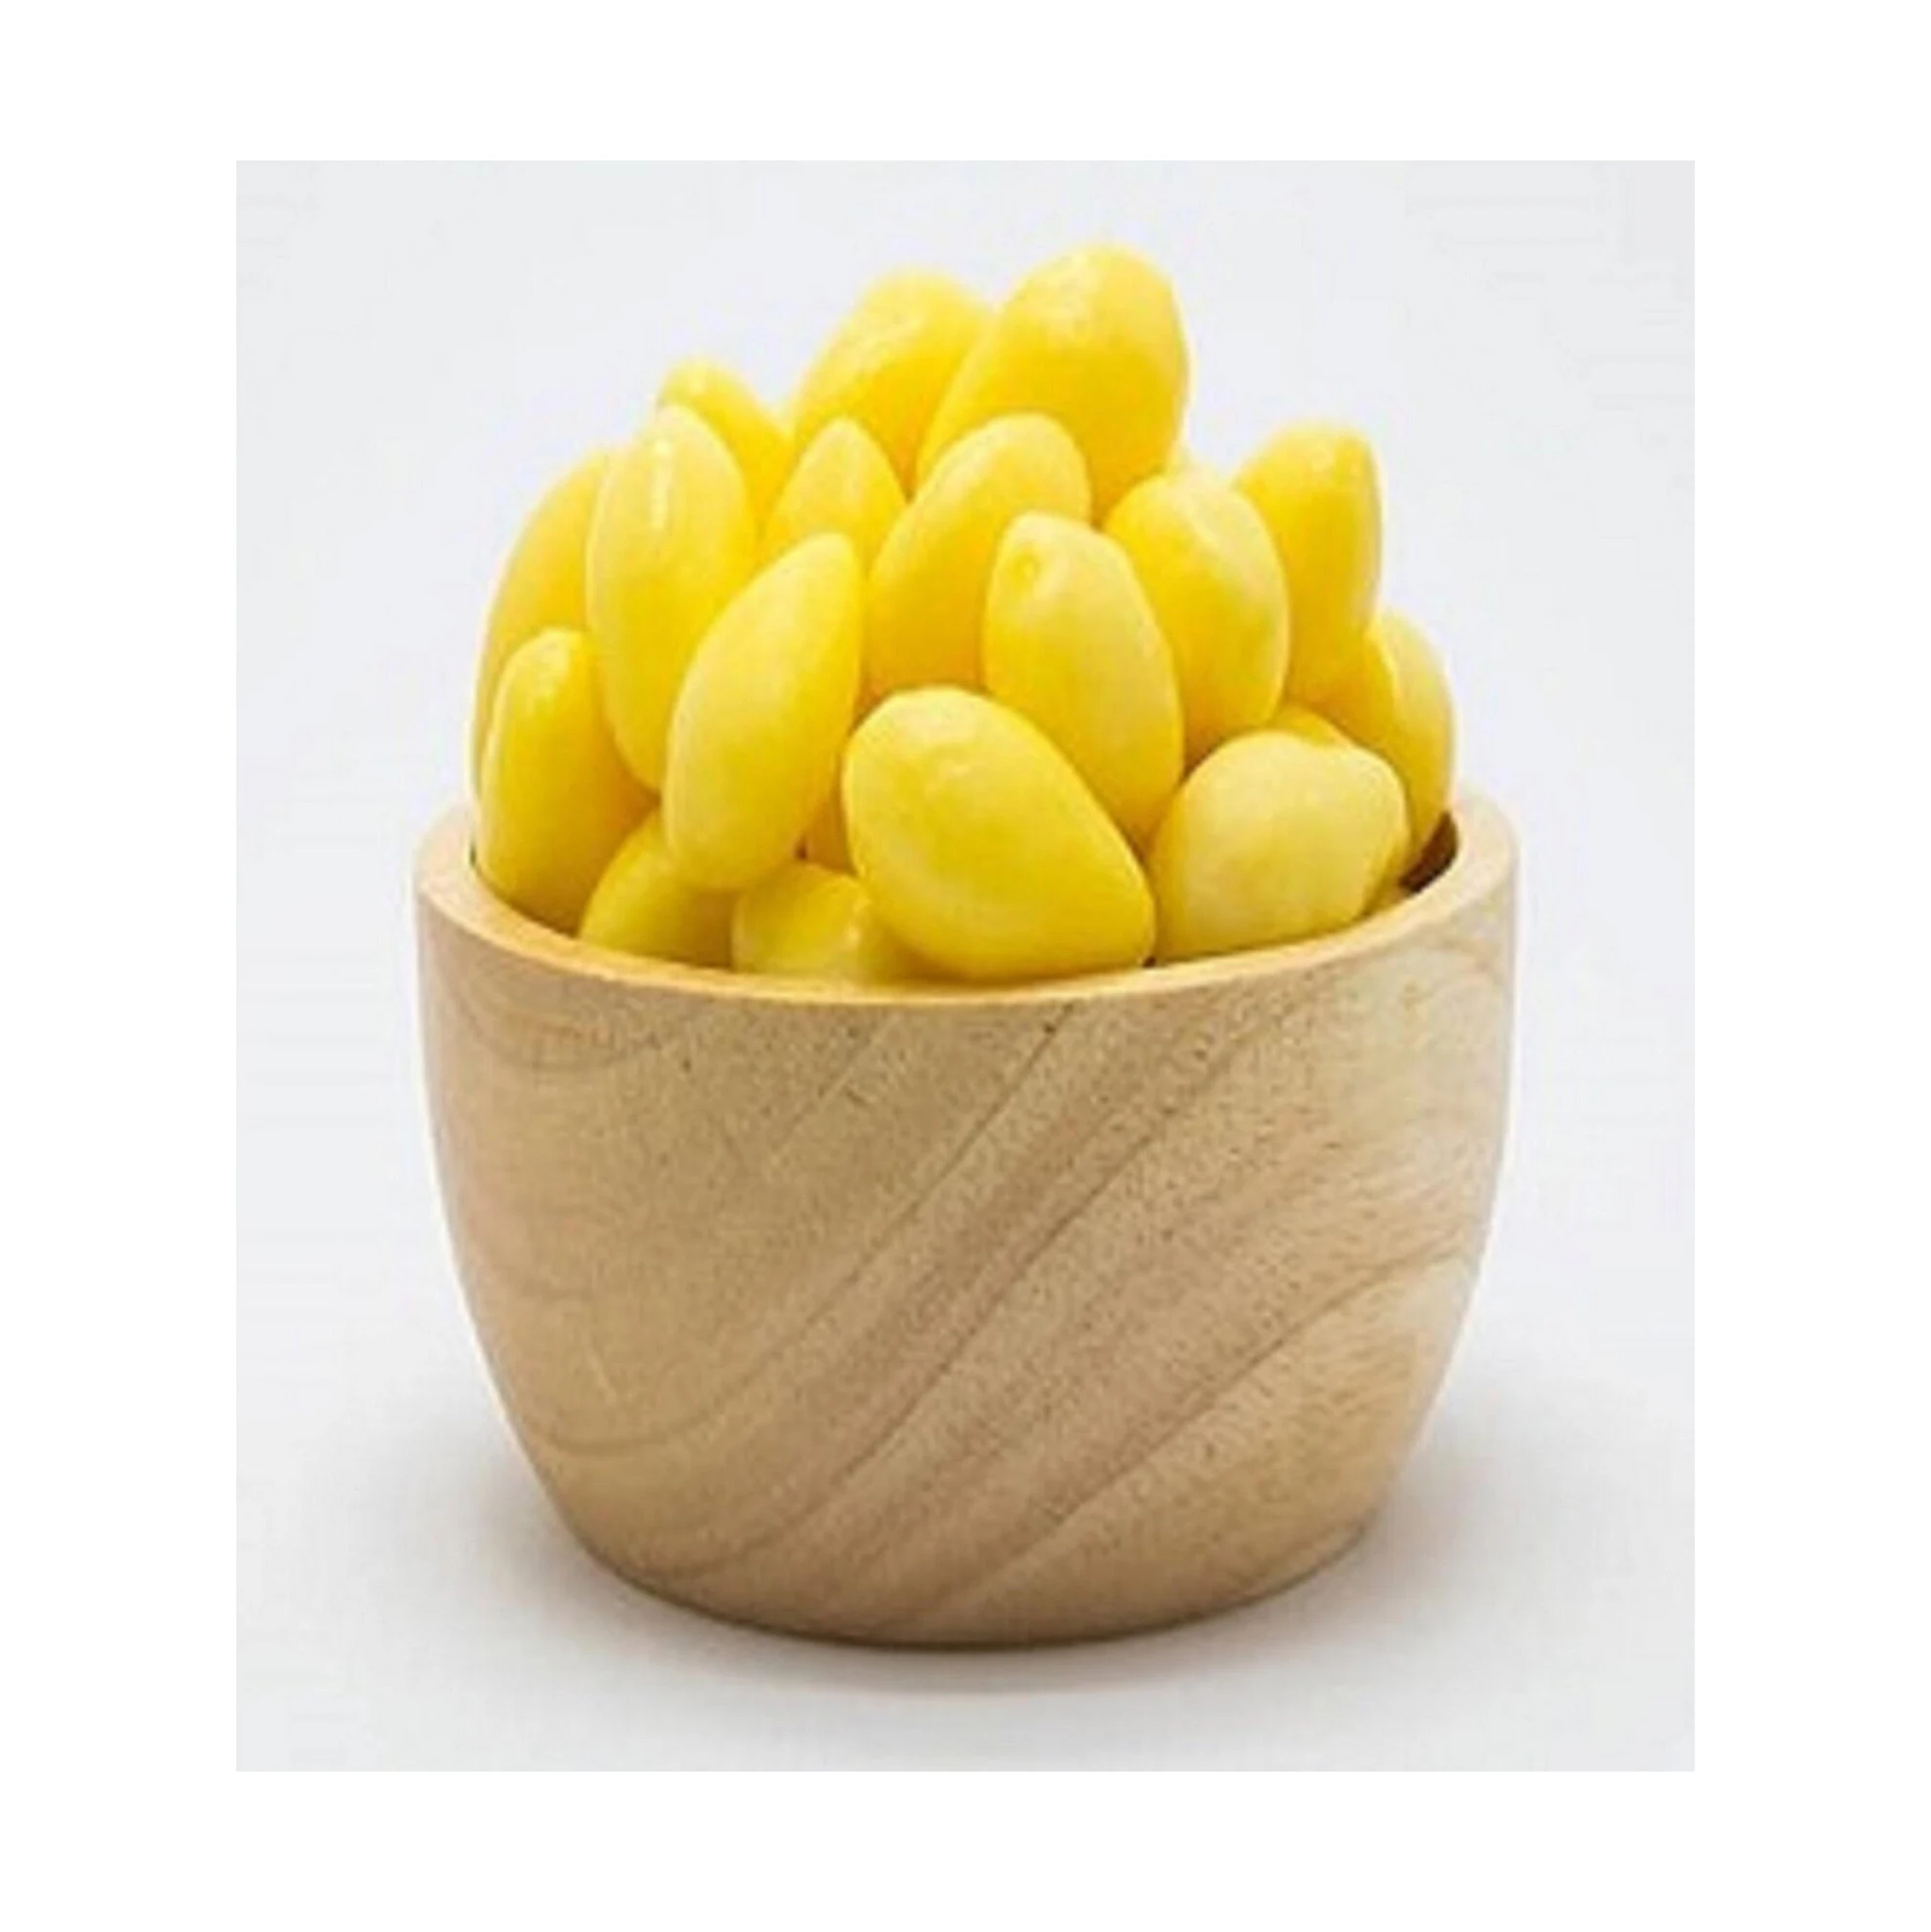 Hot Selling Price Of Raw Ginkgo Nuts Available in Bulk Quantity